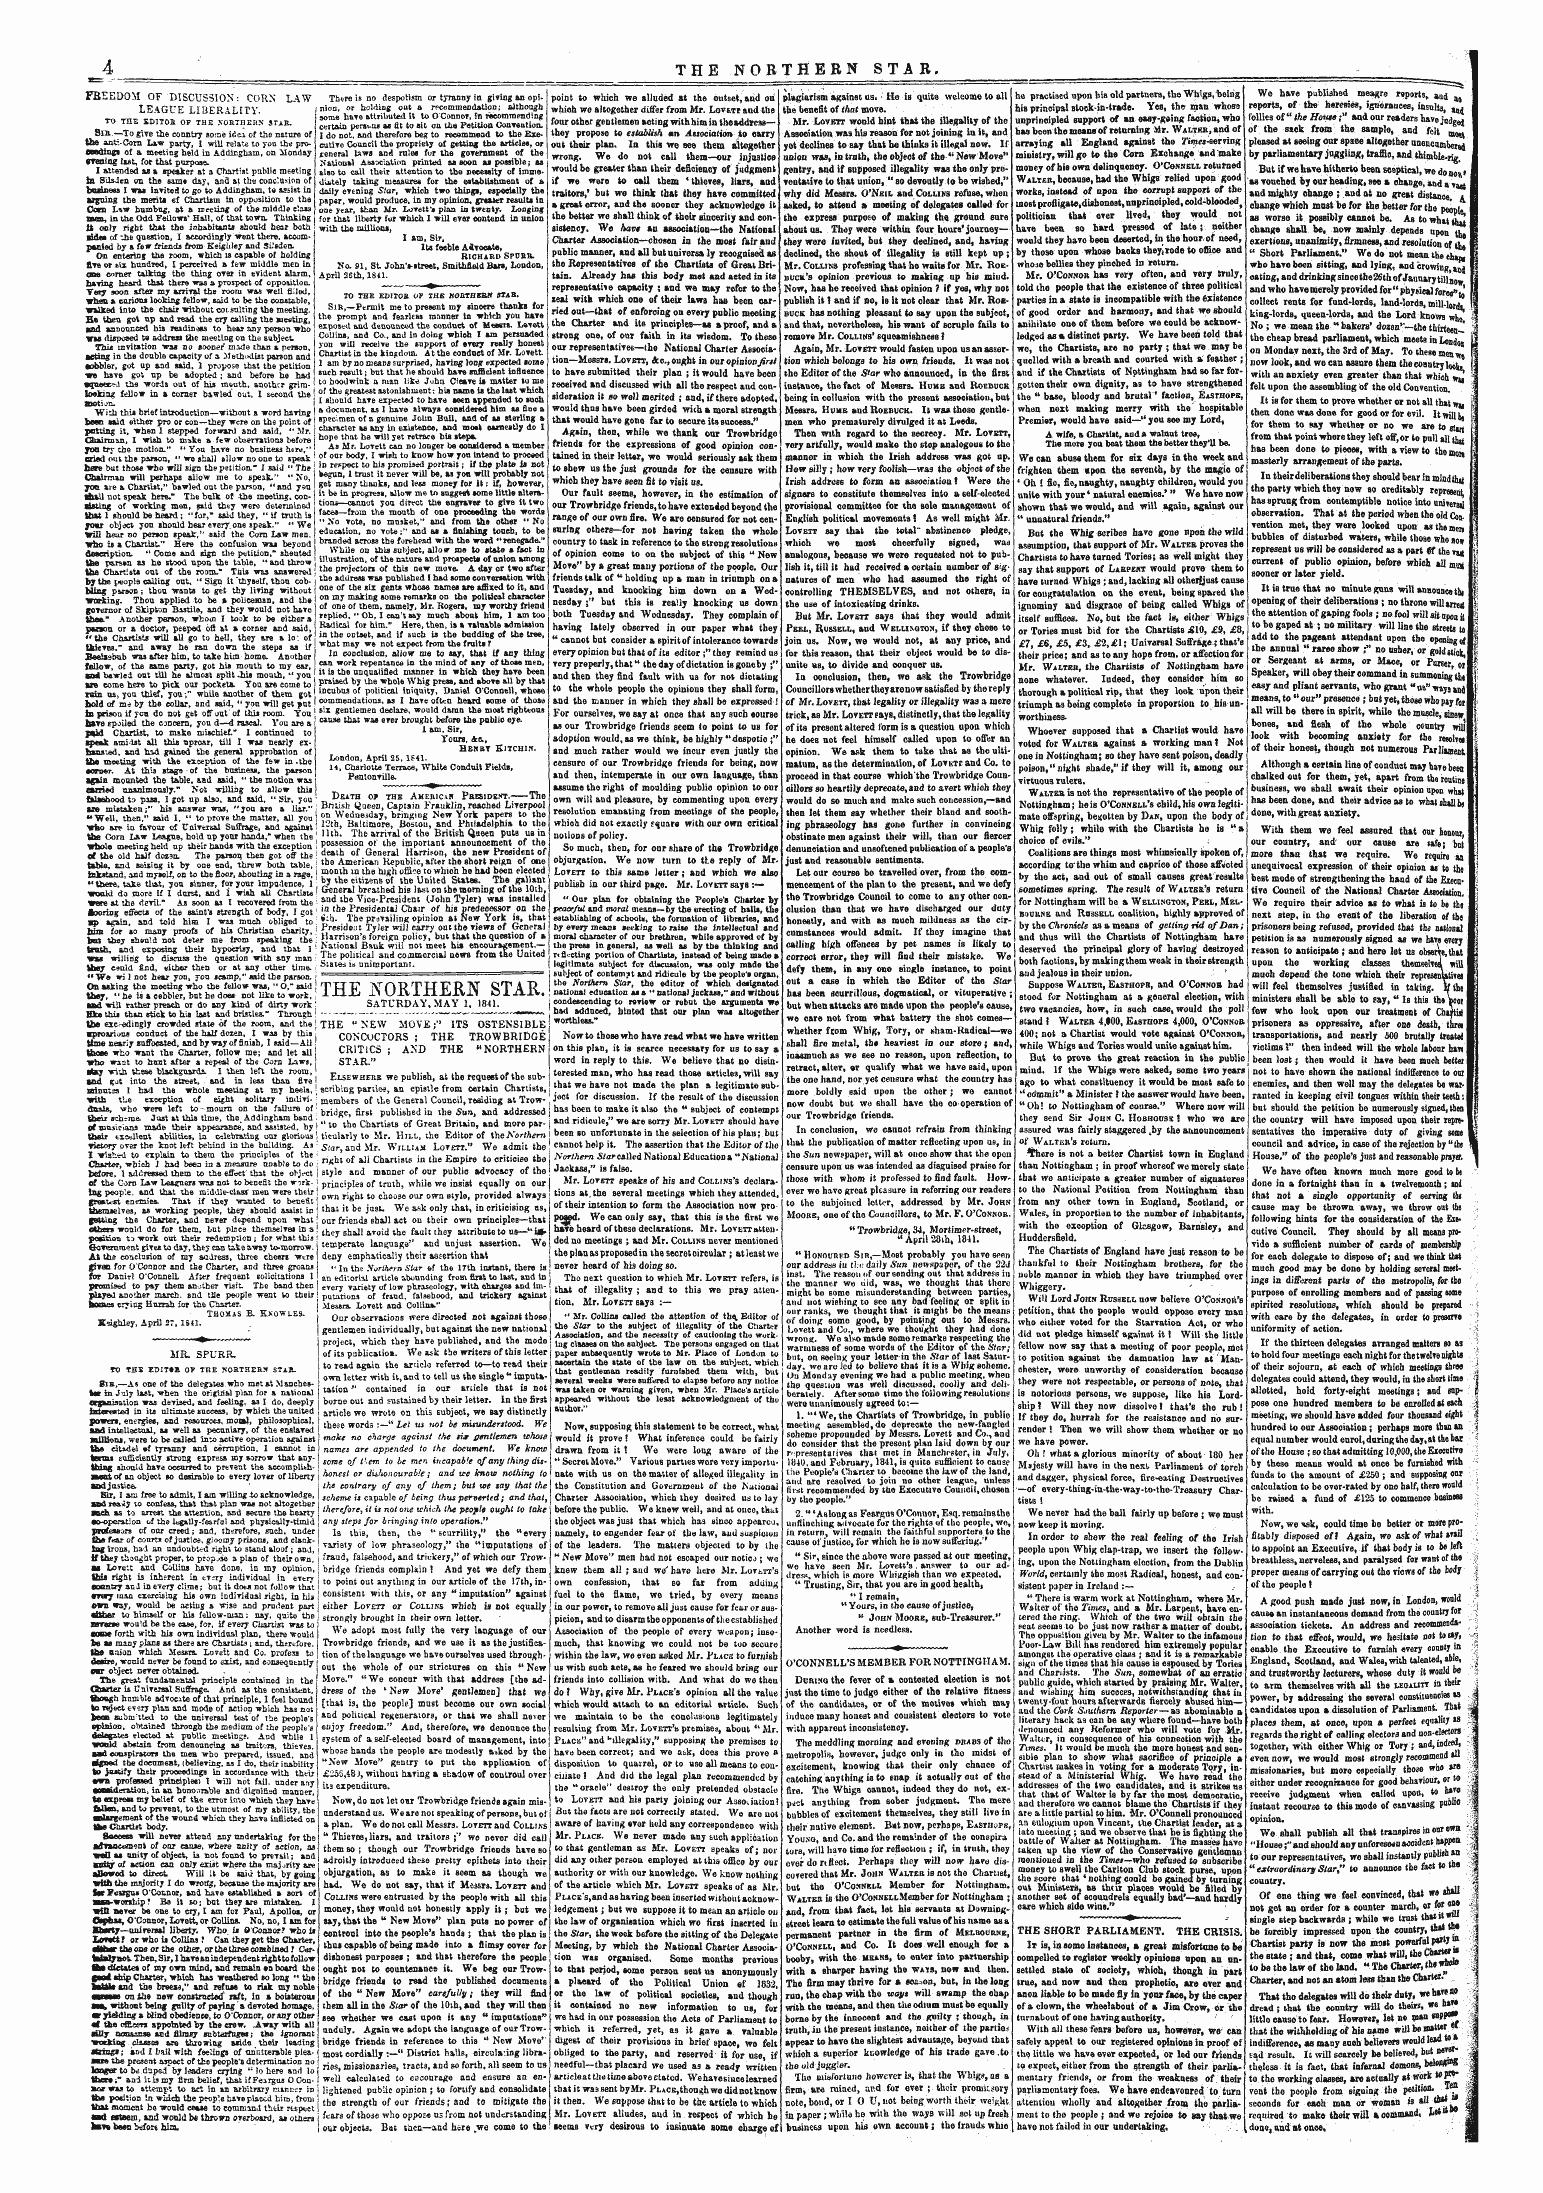 Northern Star (1837-1852): jS F Y, 3rd edition - The Jnoether]Si Star. Saturday, May 1, 1841.